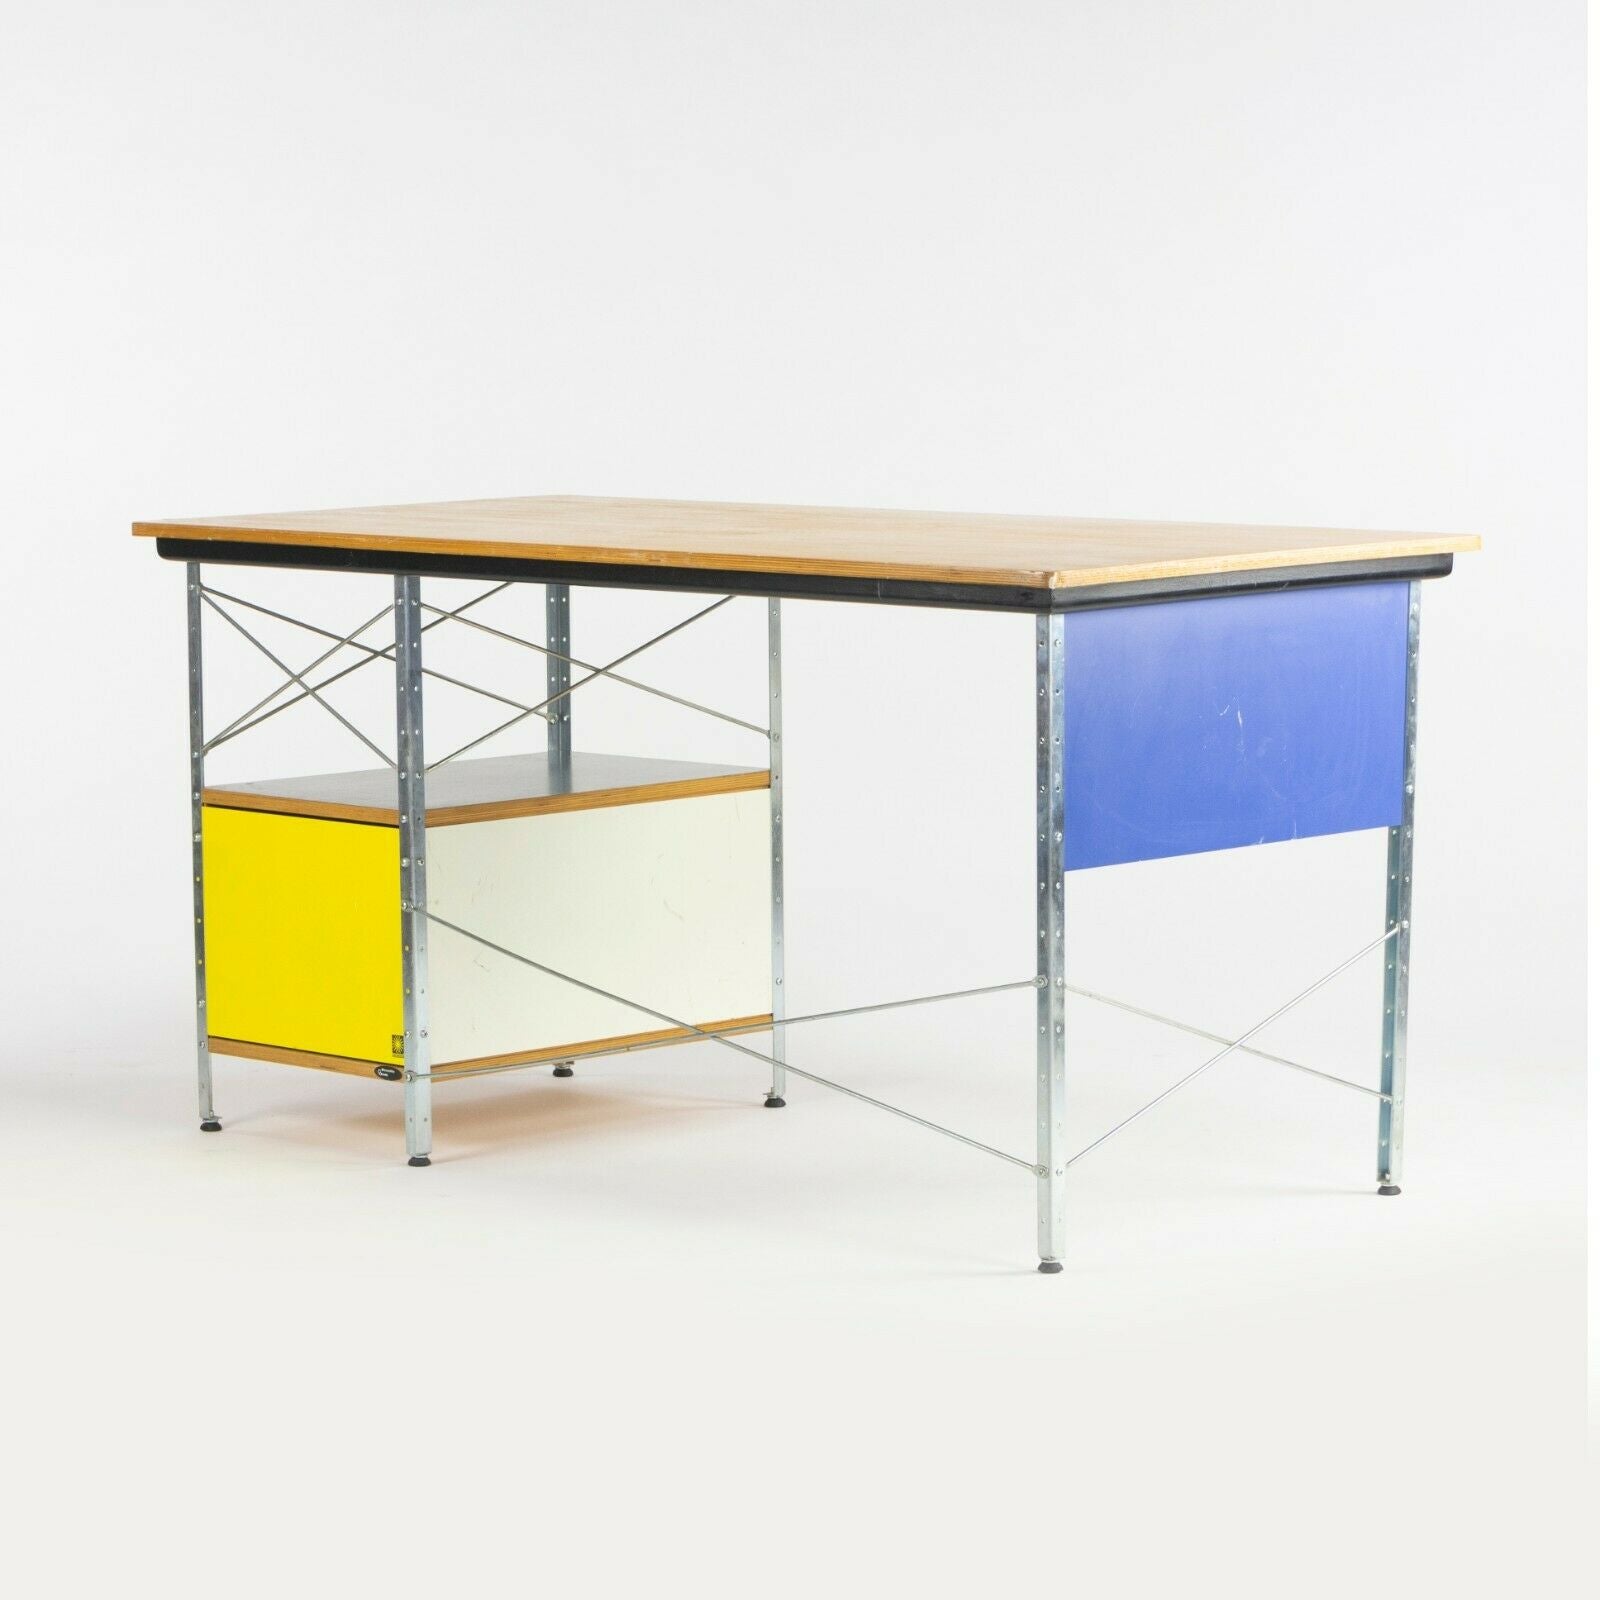 SOLD Charles & Ray Eames for Herman Miller 2000s EDU Desk Multi Color w/ Wood Top